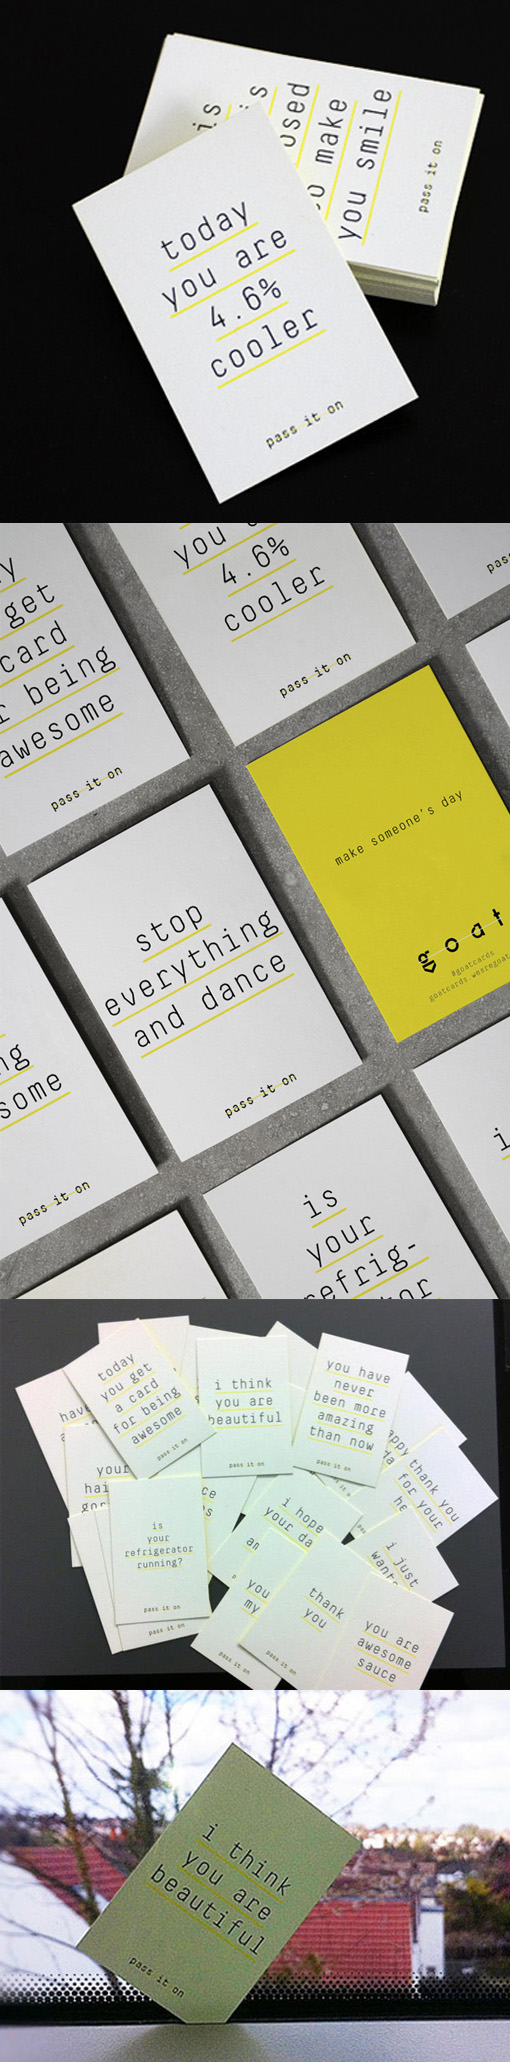 Quirky And Humorous Messages On Business Cards For A Brand Agency